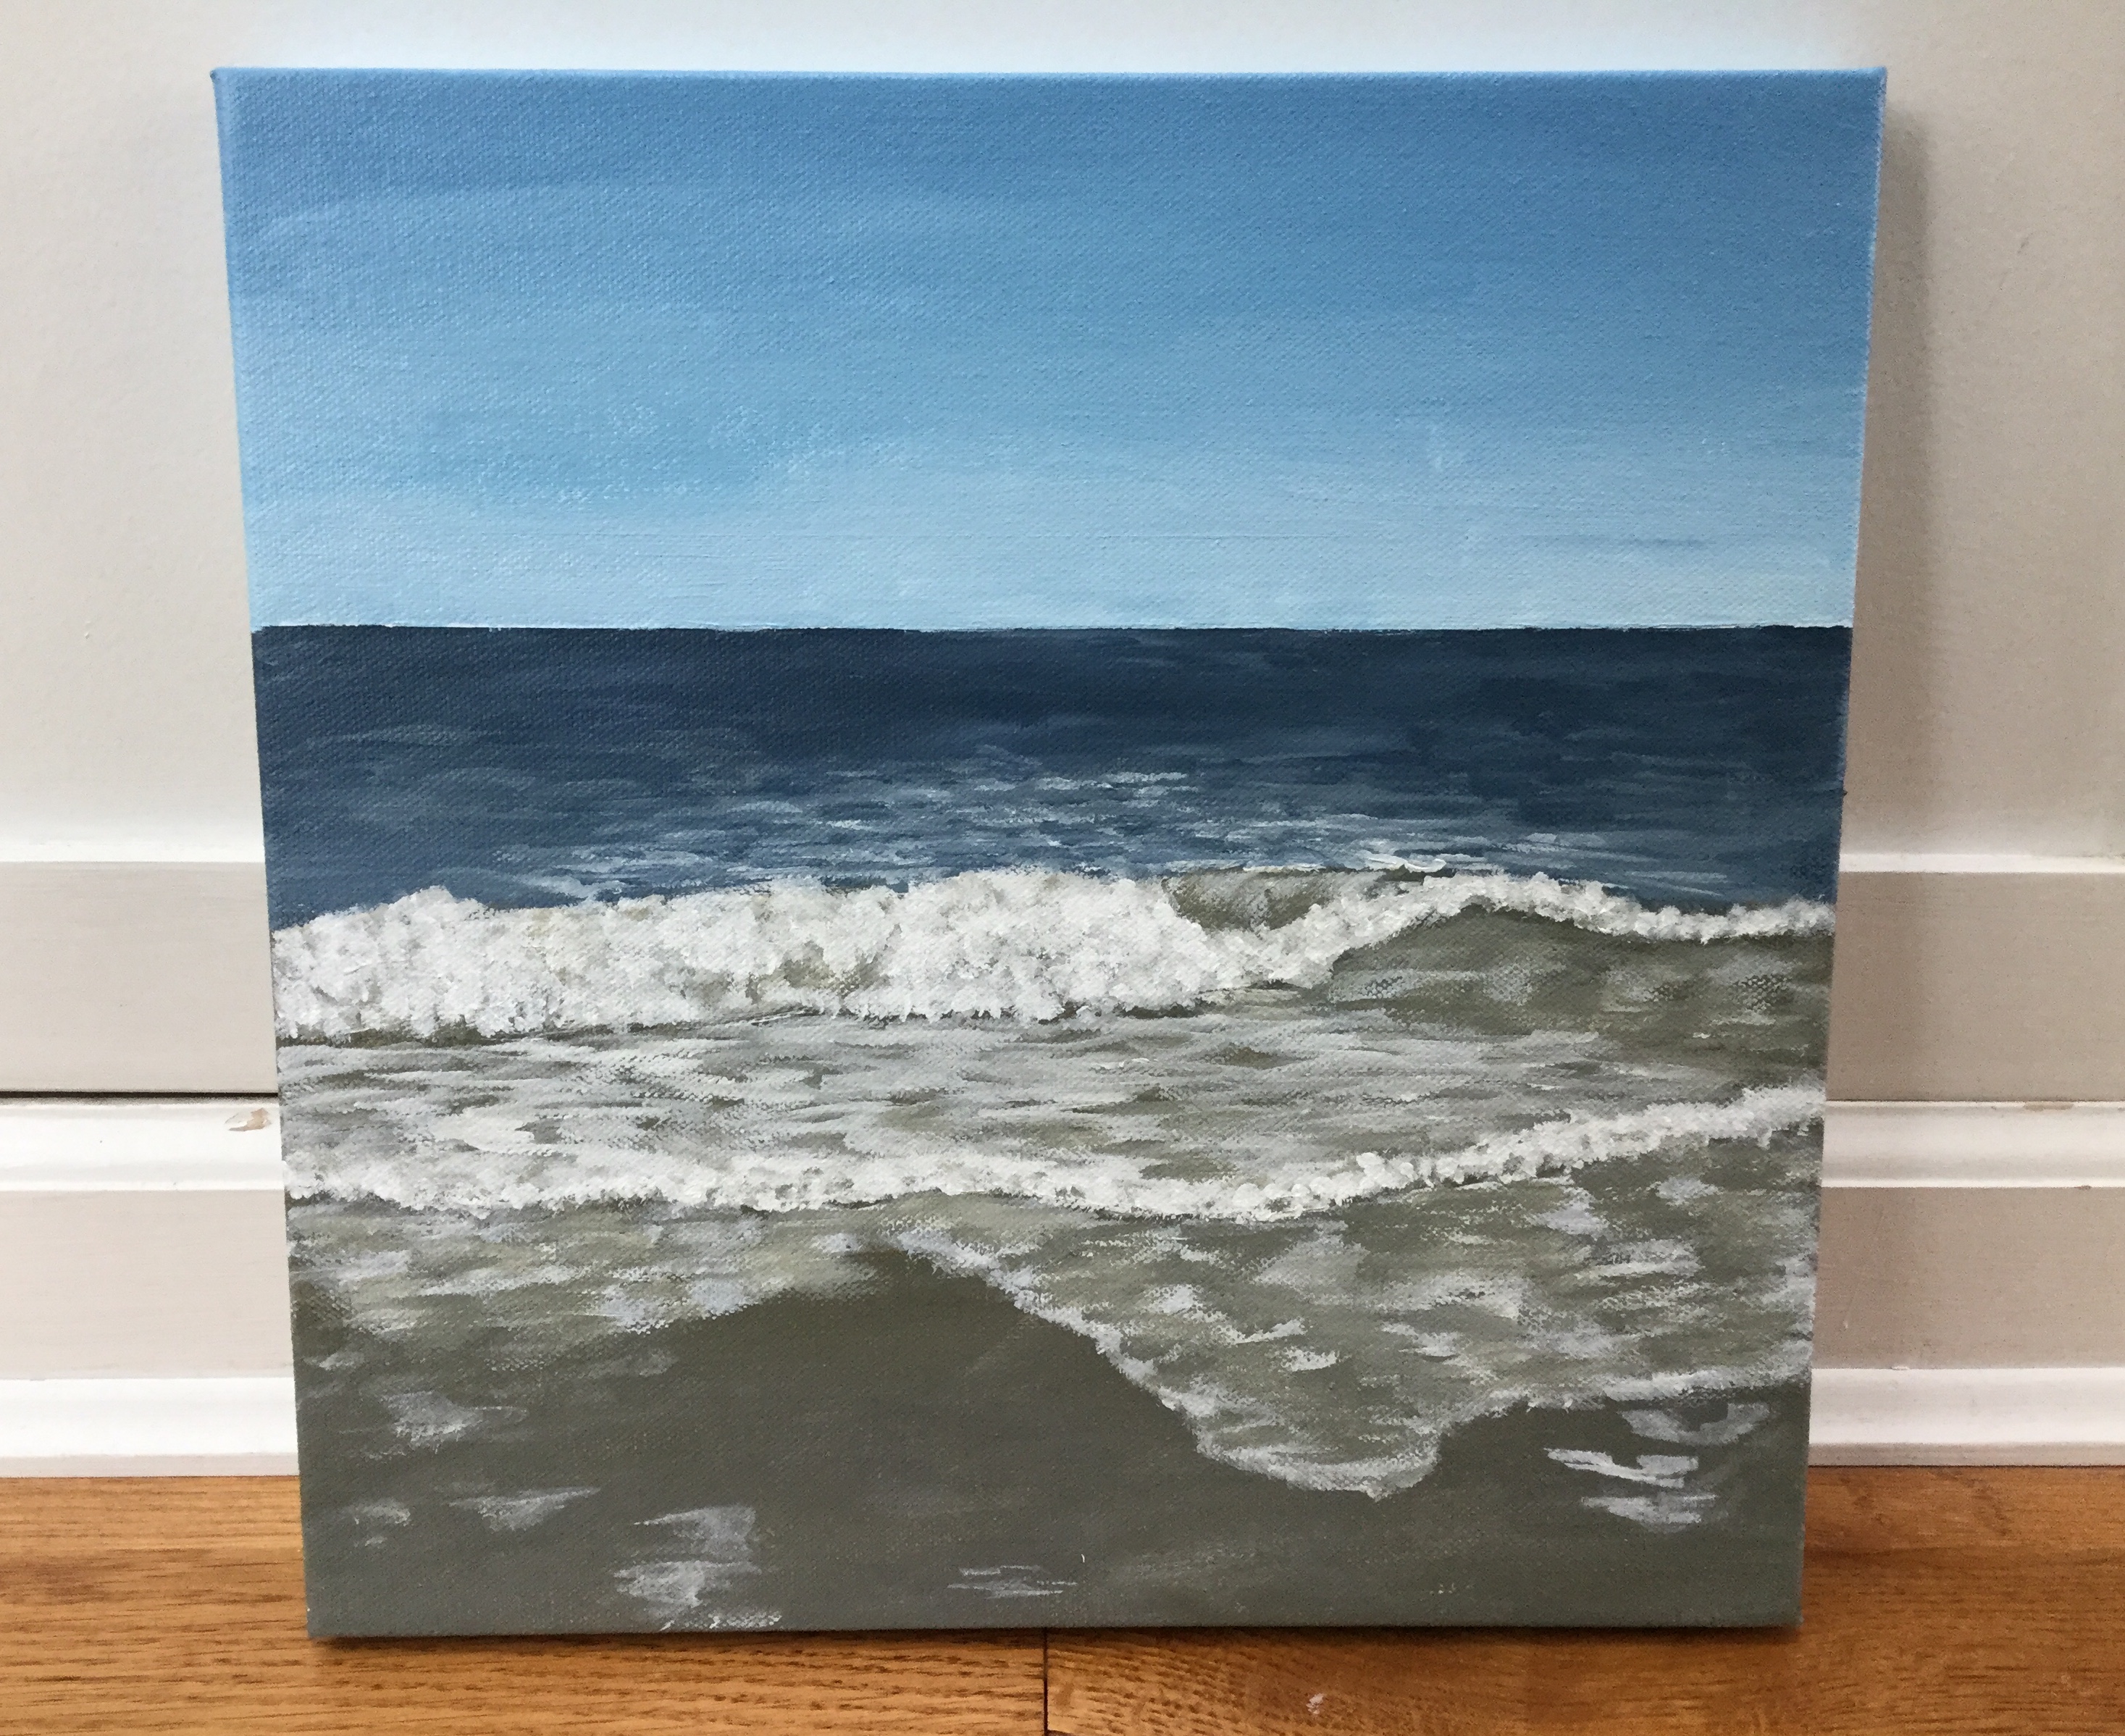 Going from watercolor to acrylics, painting acrylic seascapes